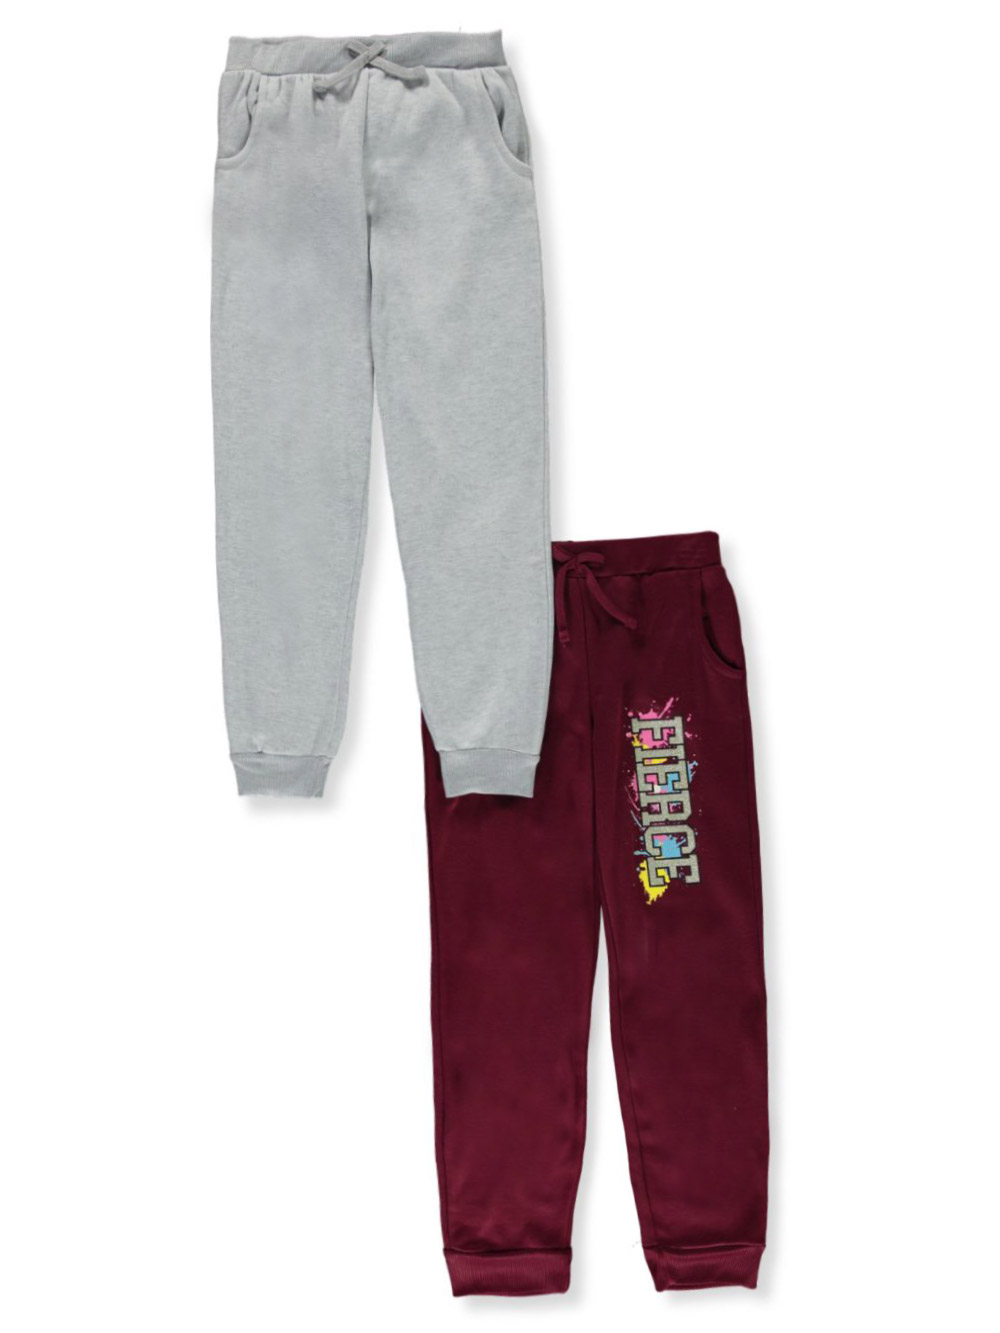 Girls Pink Sweatpants and Joggers